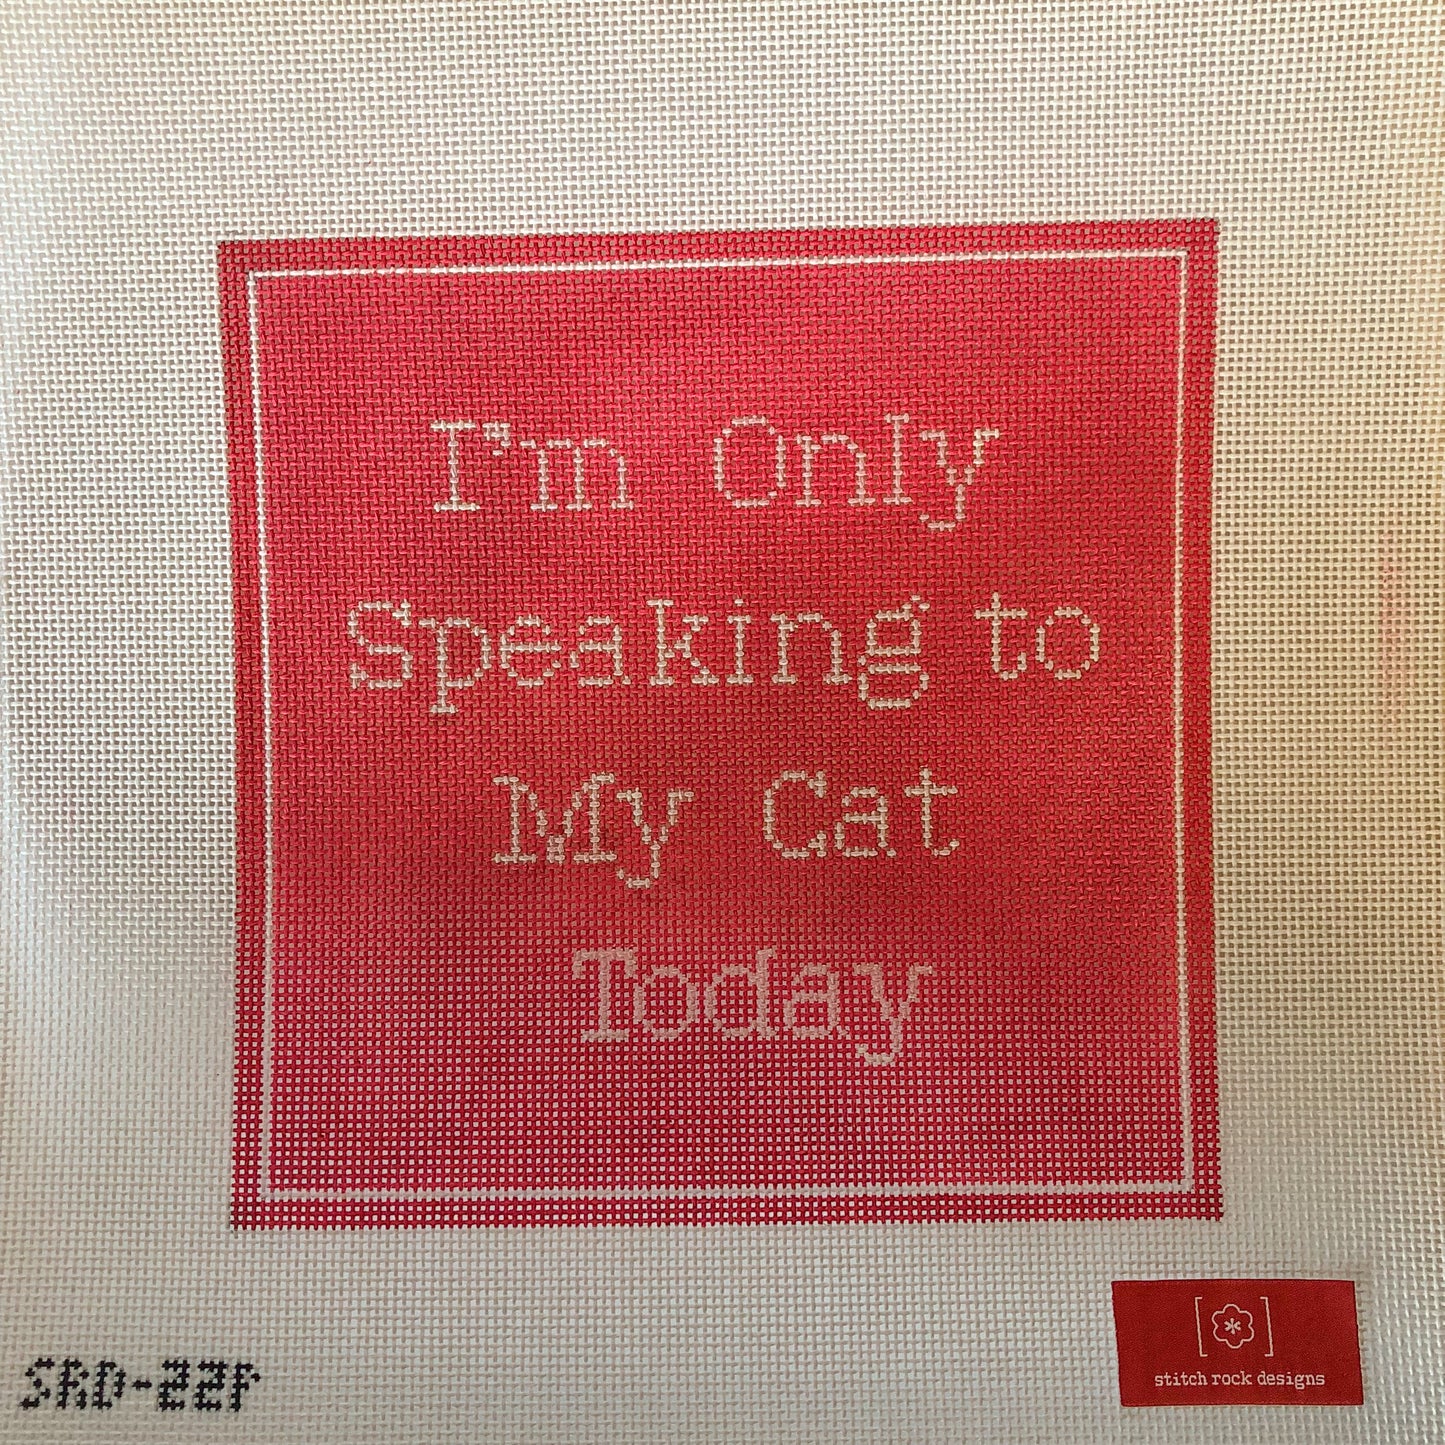 I’m Only Speaking to My Cat Today- Pink - Imperfection